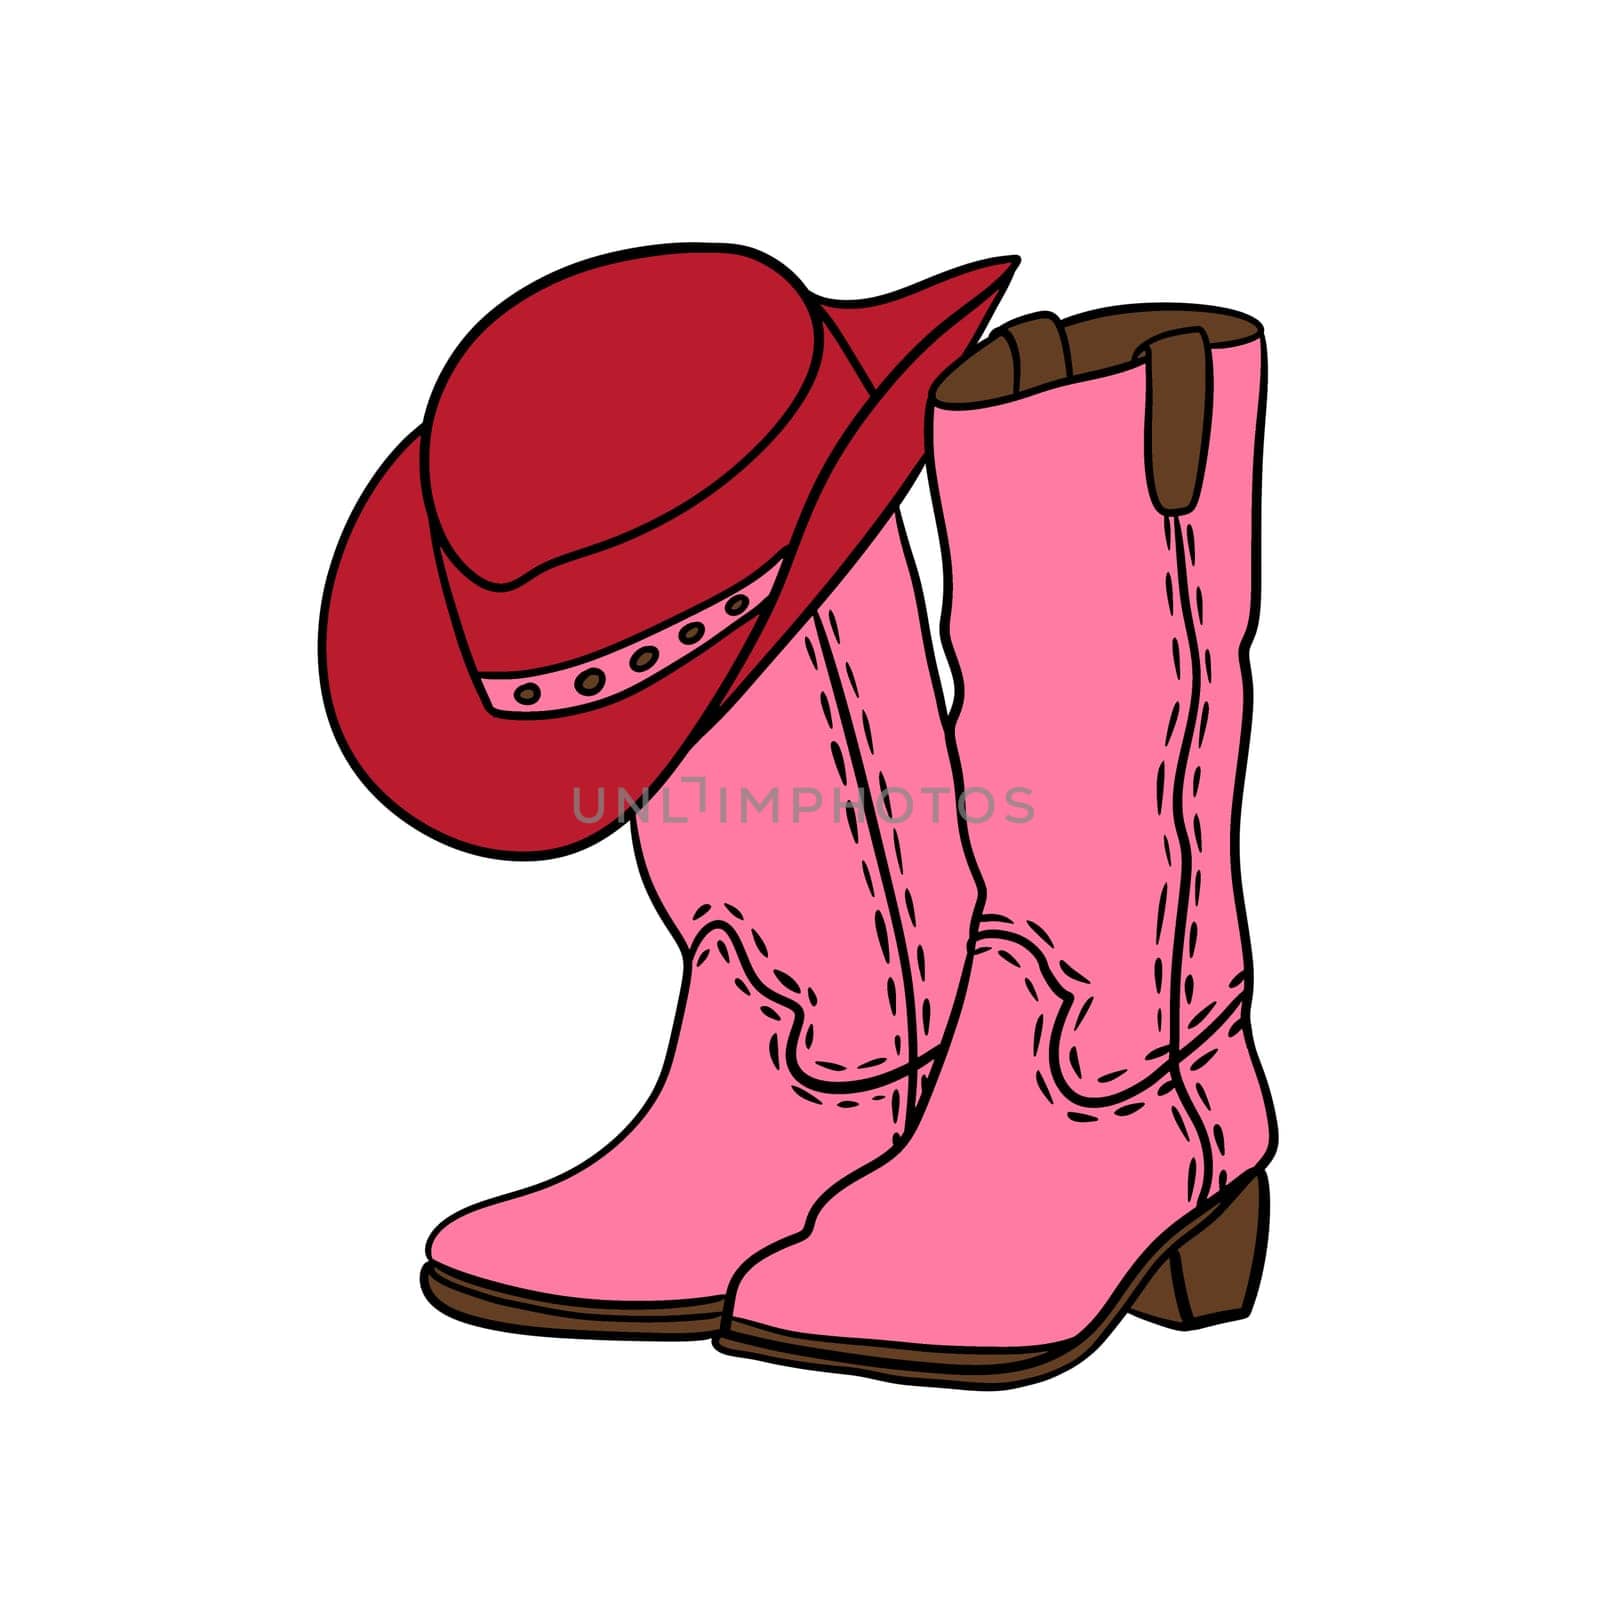 Hand drawn illustration of pink cowboy cowgirl boots red hat in western southwestern style. Black line drawing of ranch adventure design, wild west american print, colorful cartoon shoes. by Lagmar